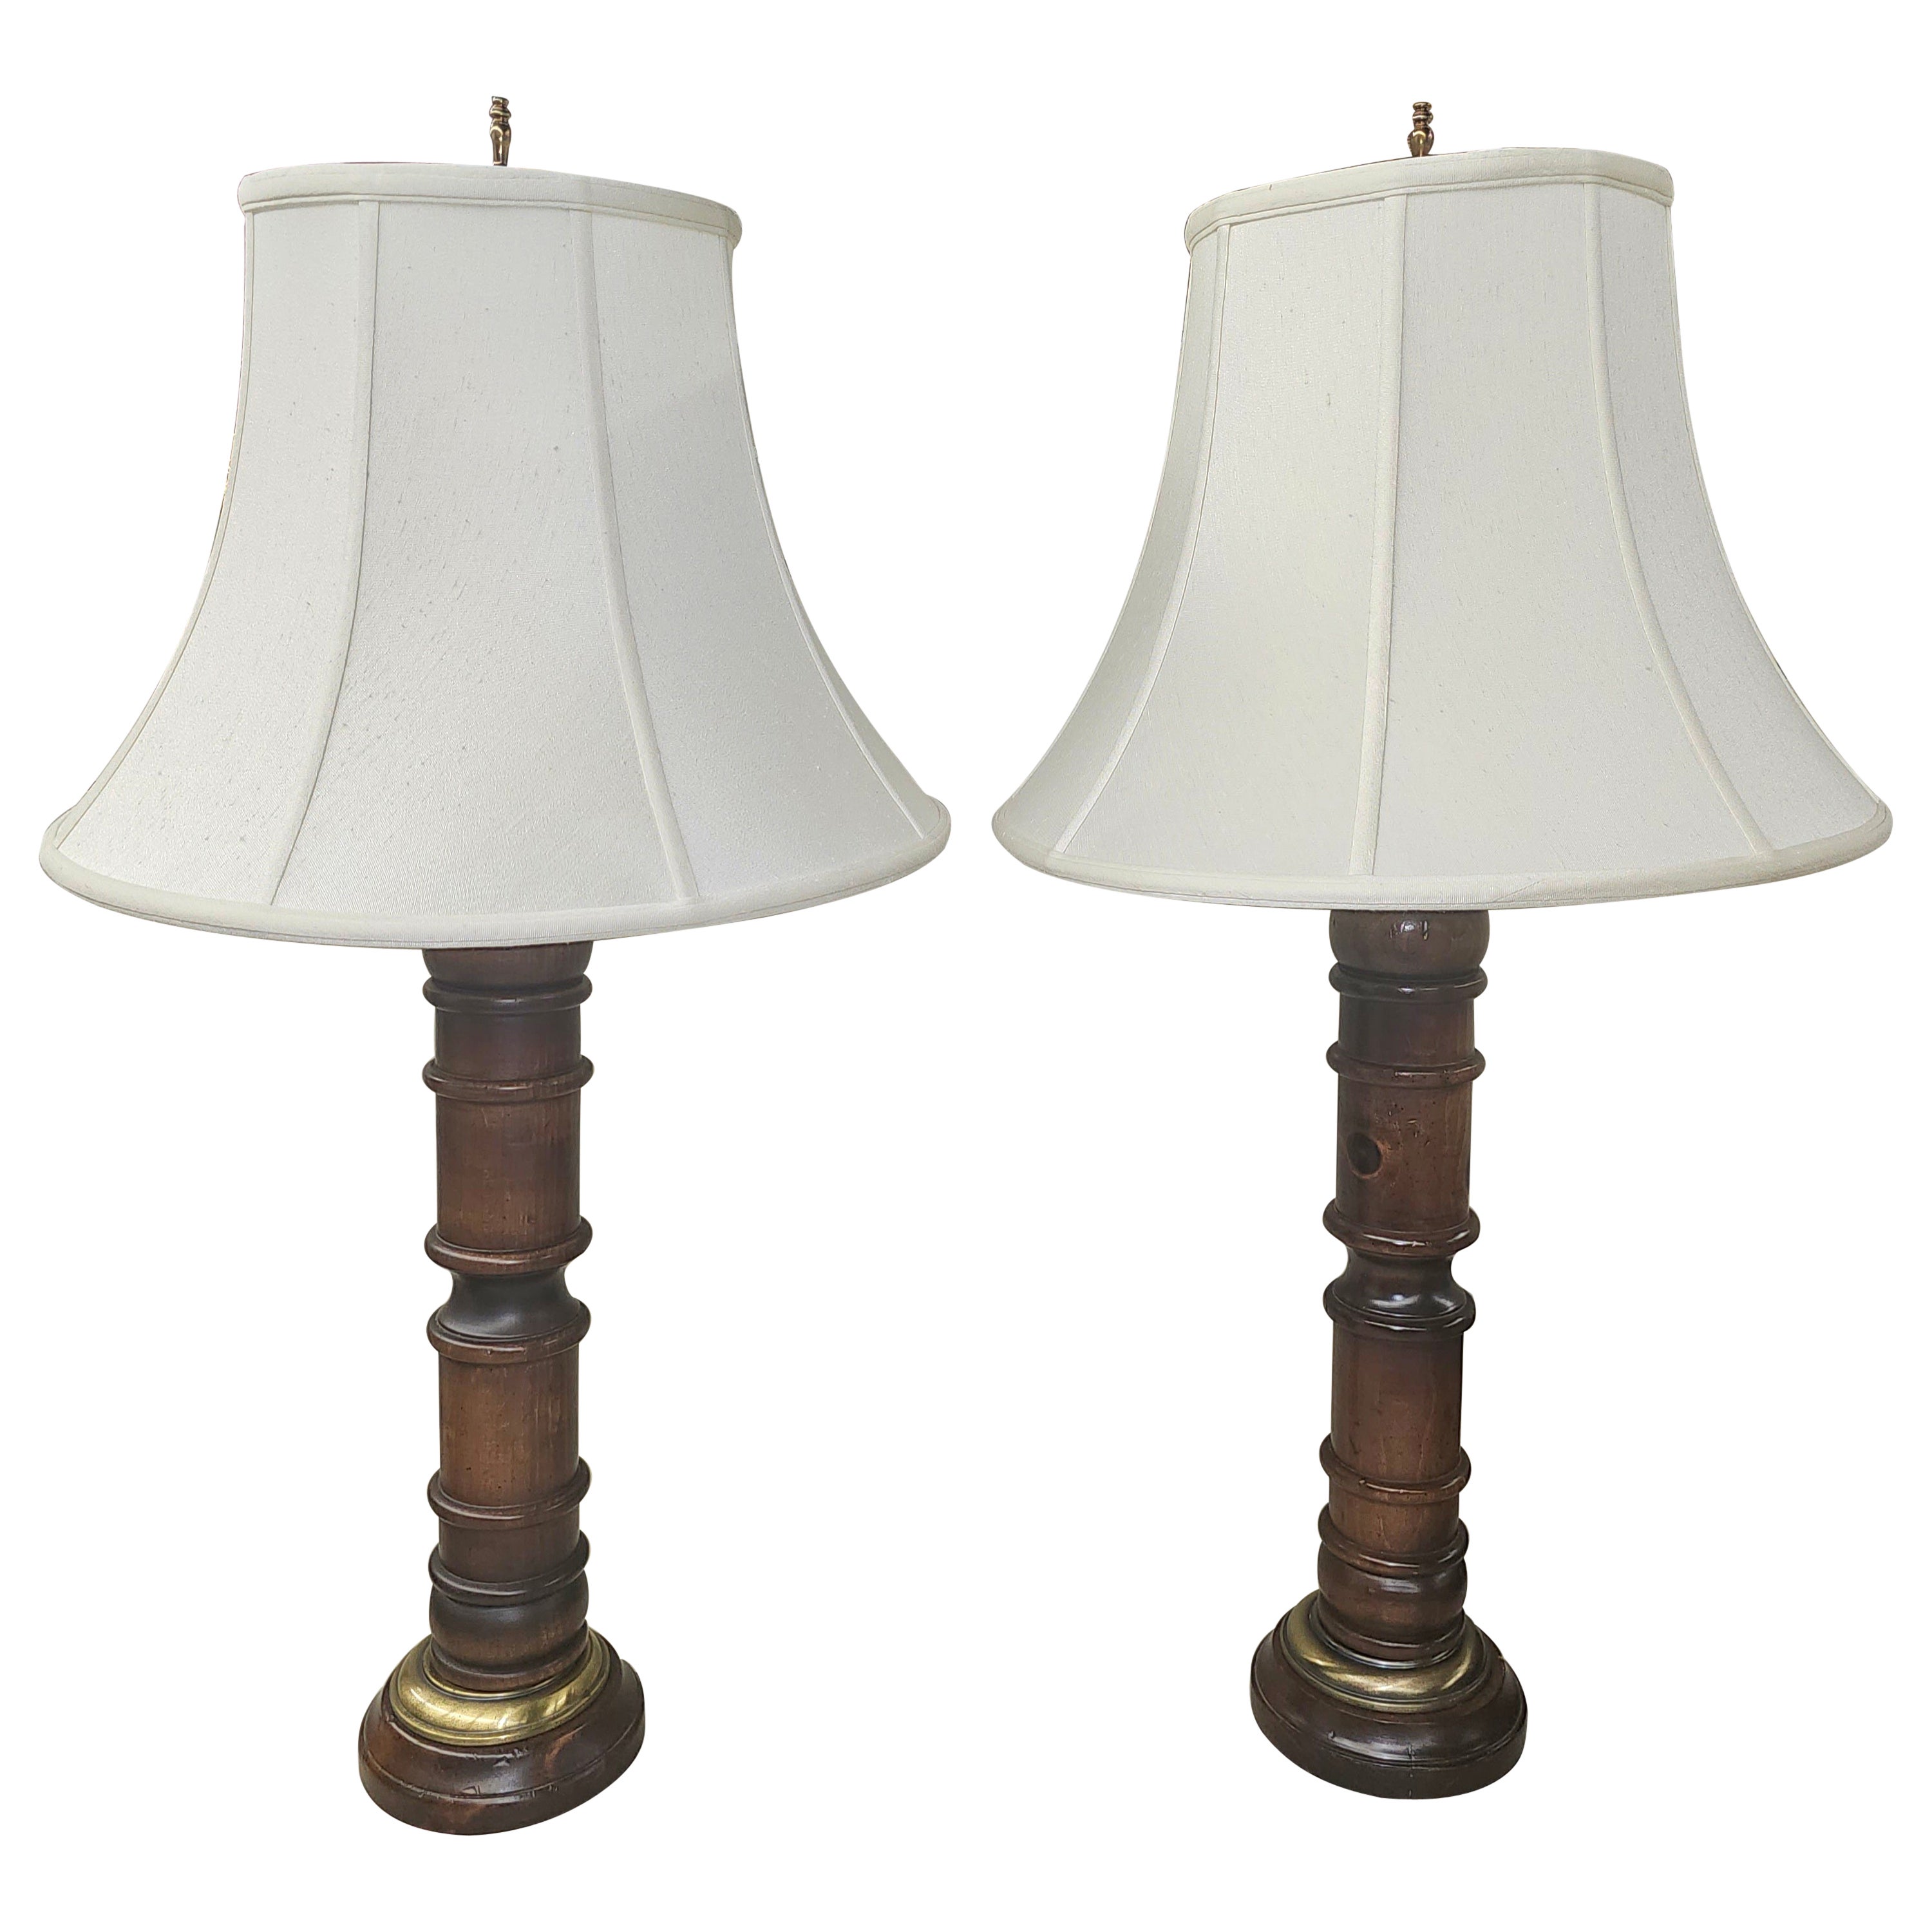 Pair Of Antiqued Pine Wood and Brass Column-Form Table Lamps